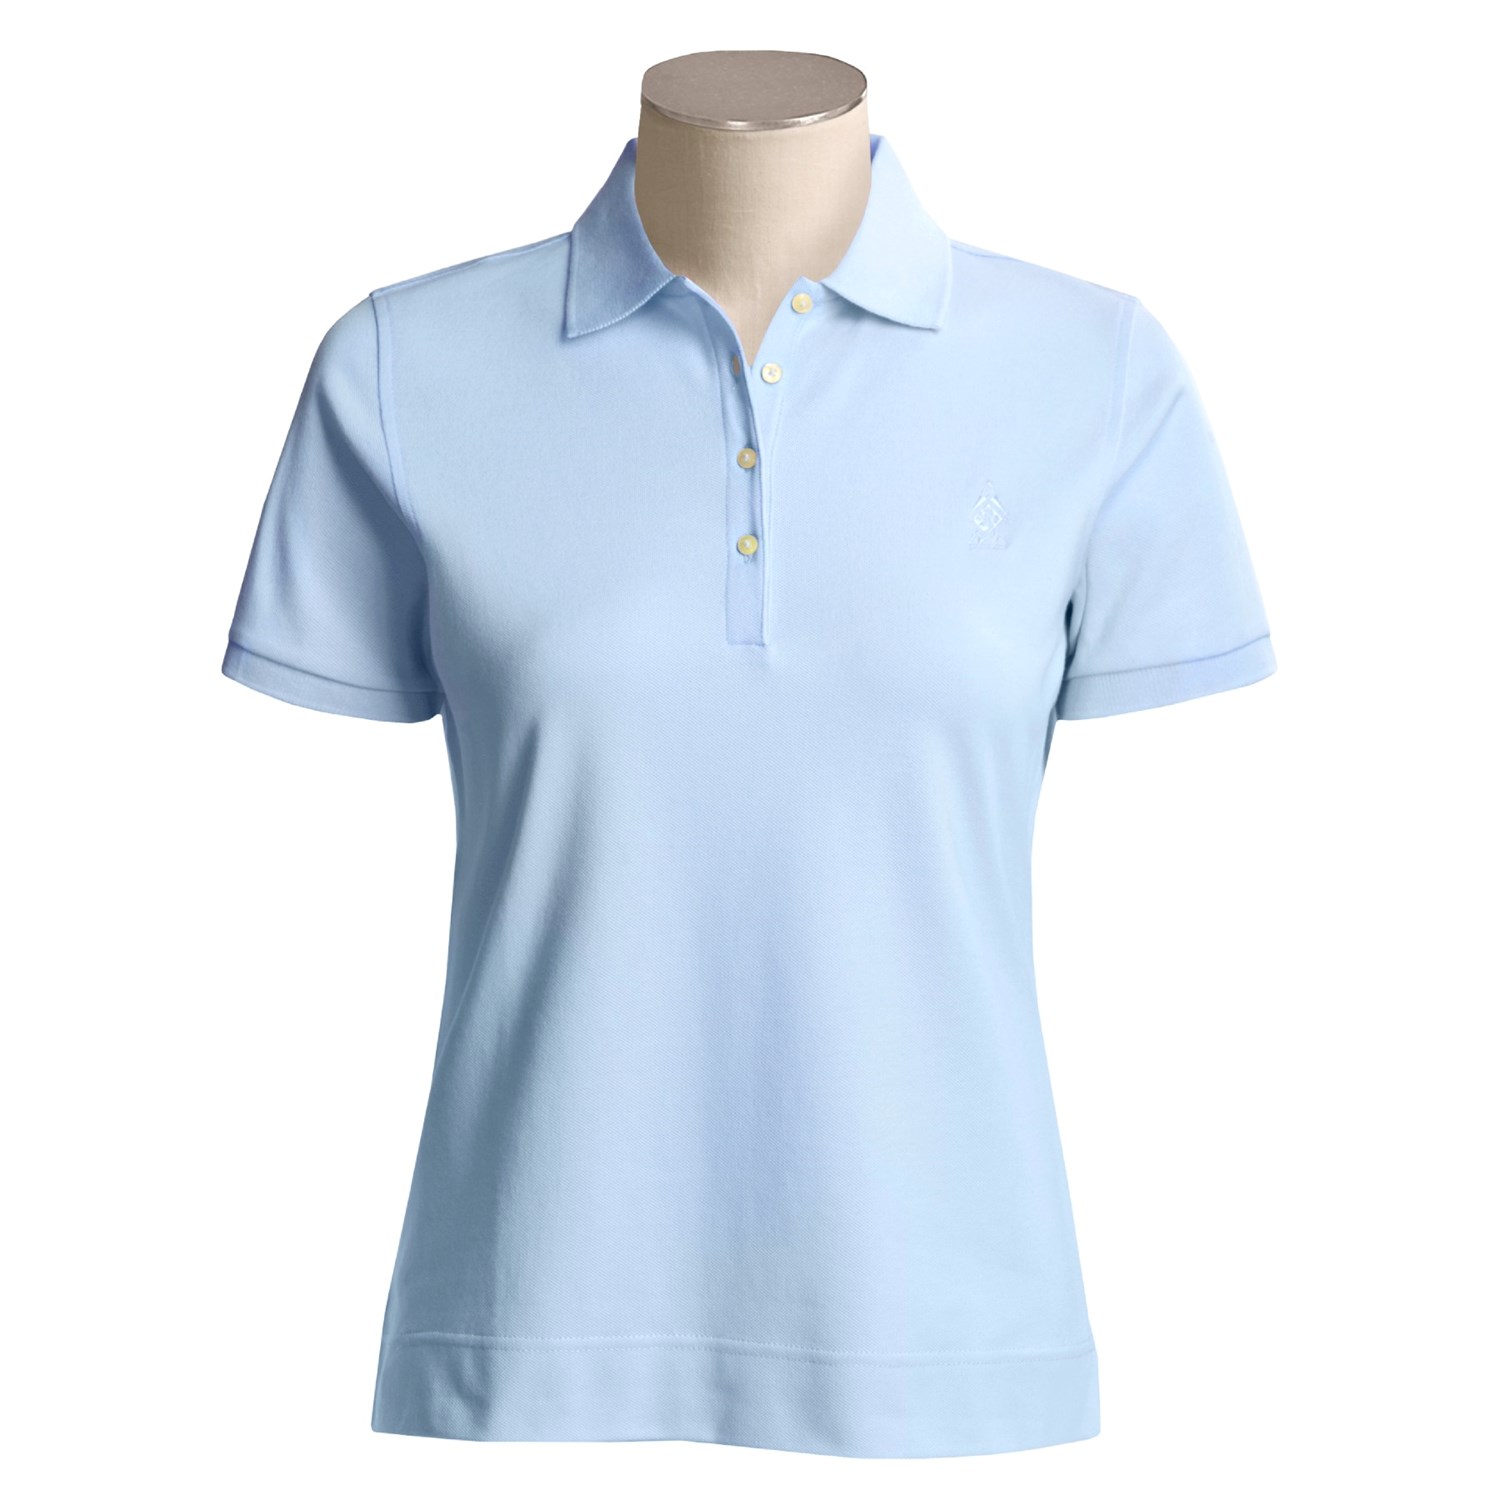 Smart Polo Shirts Available From Austin Reed